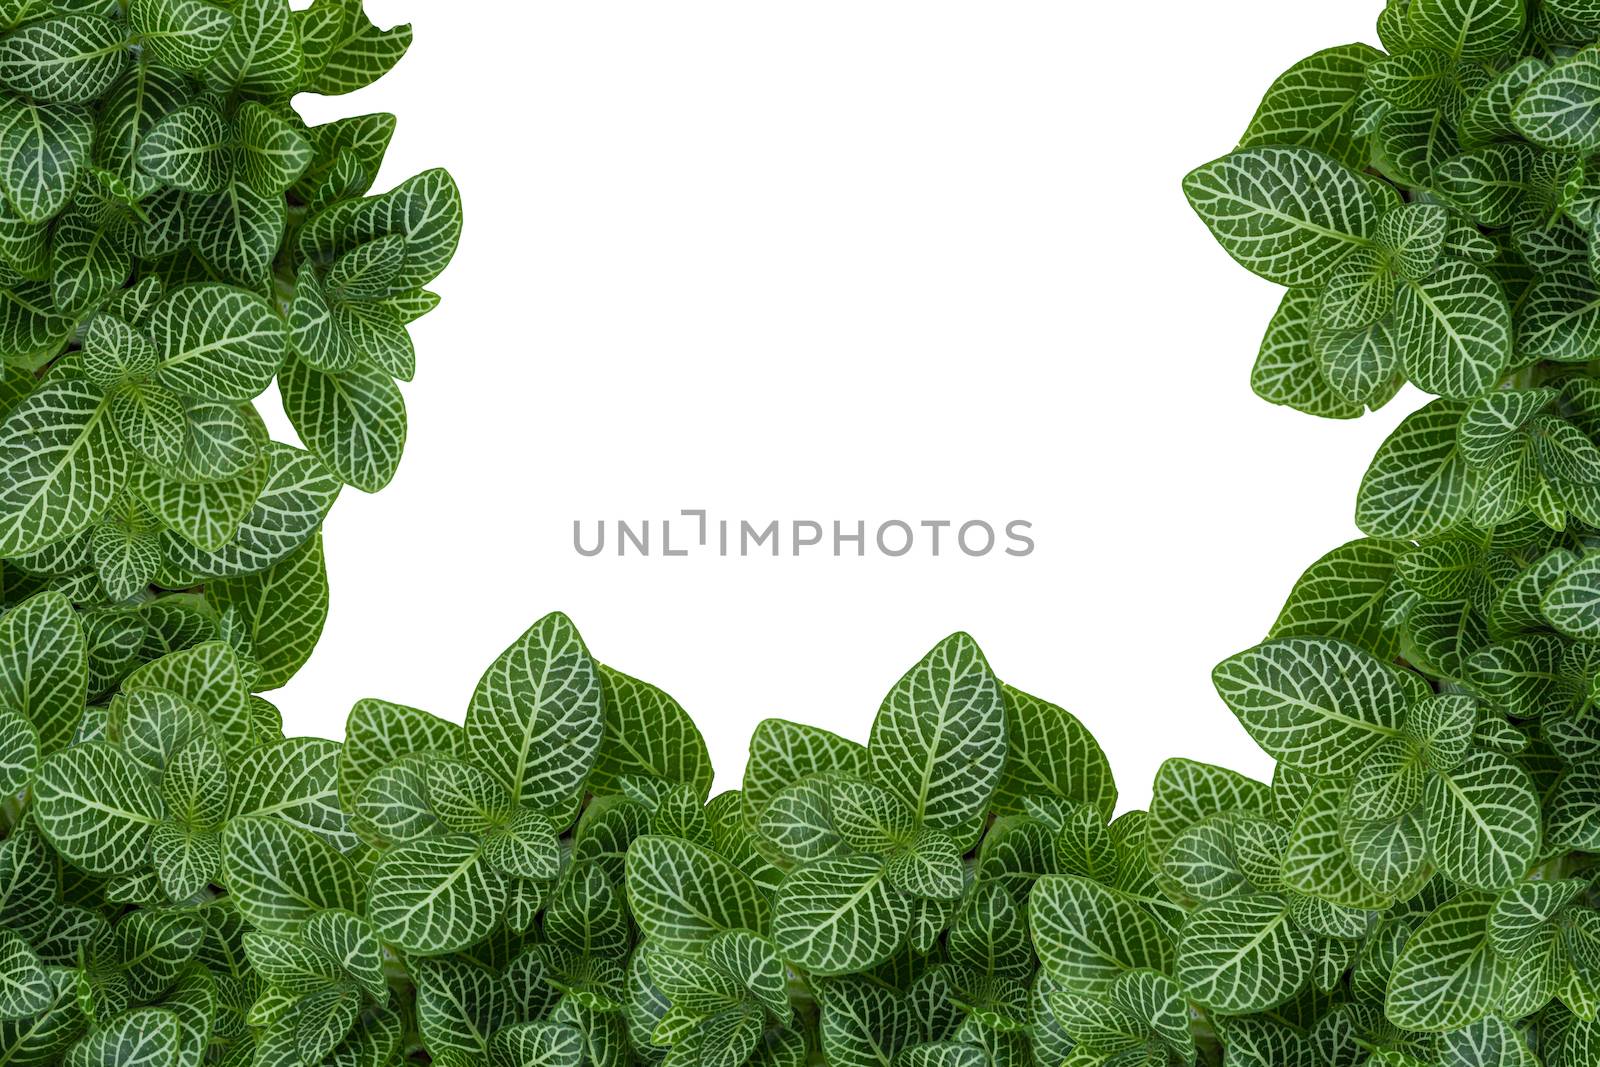 Tropical little plants as a blank frame with rich green plants with a white isolated copy space center.